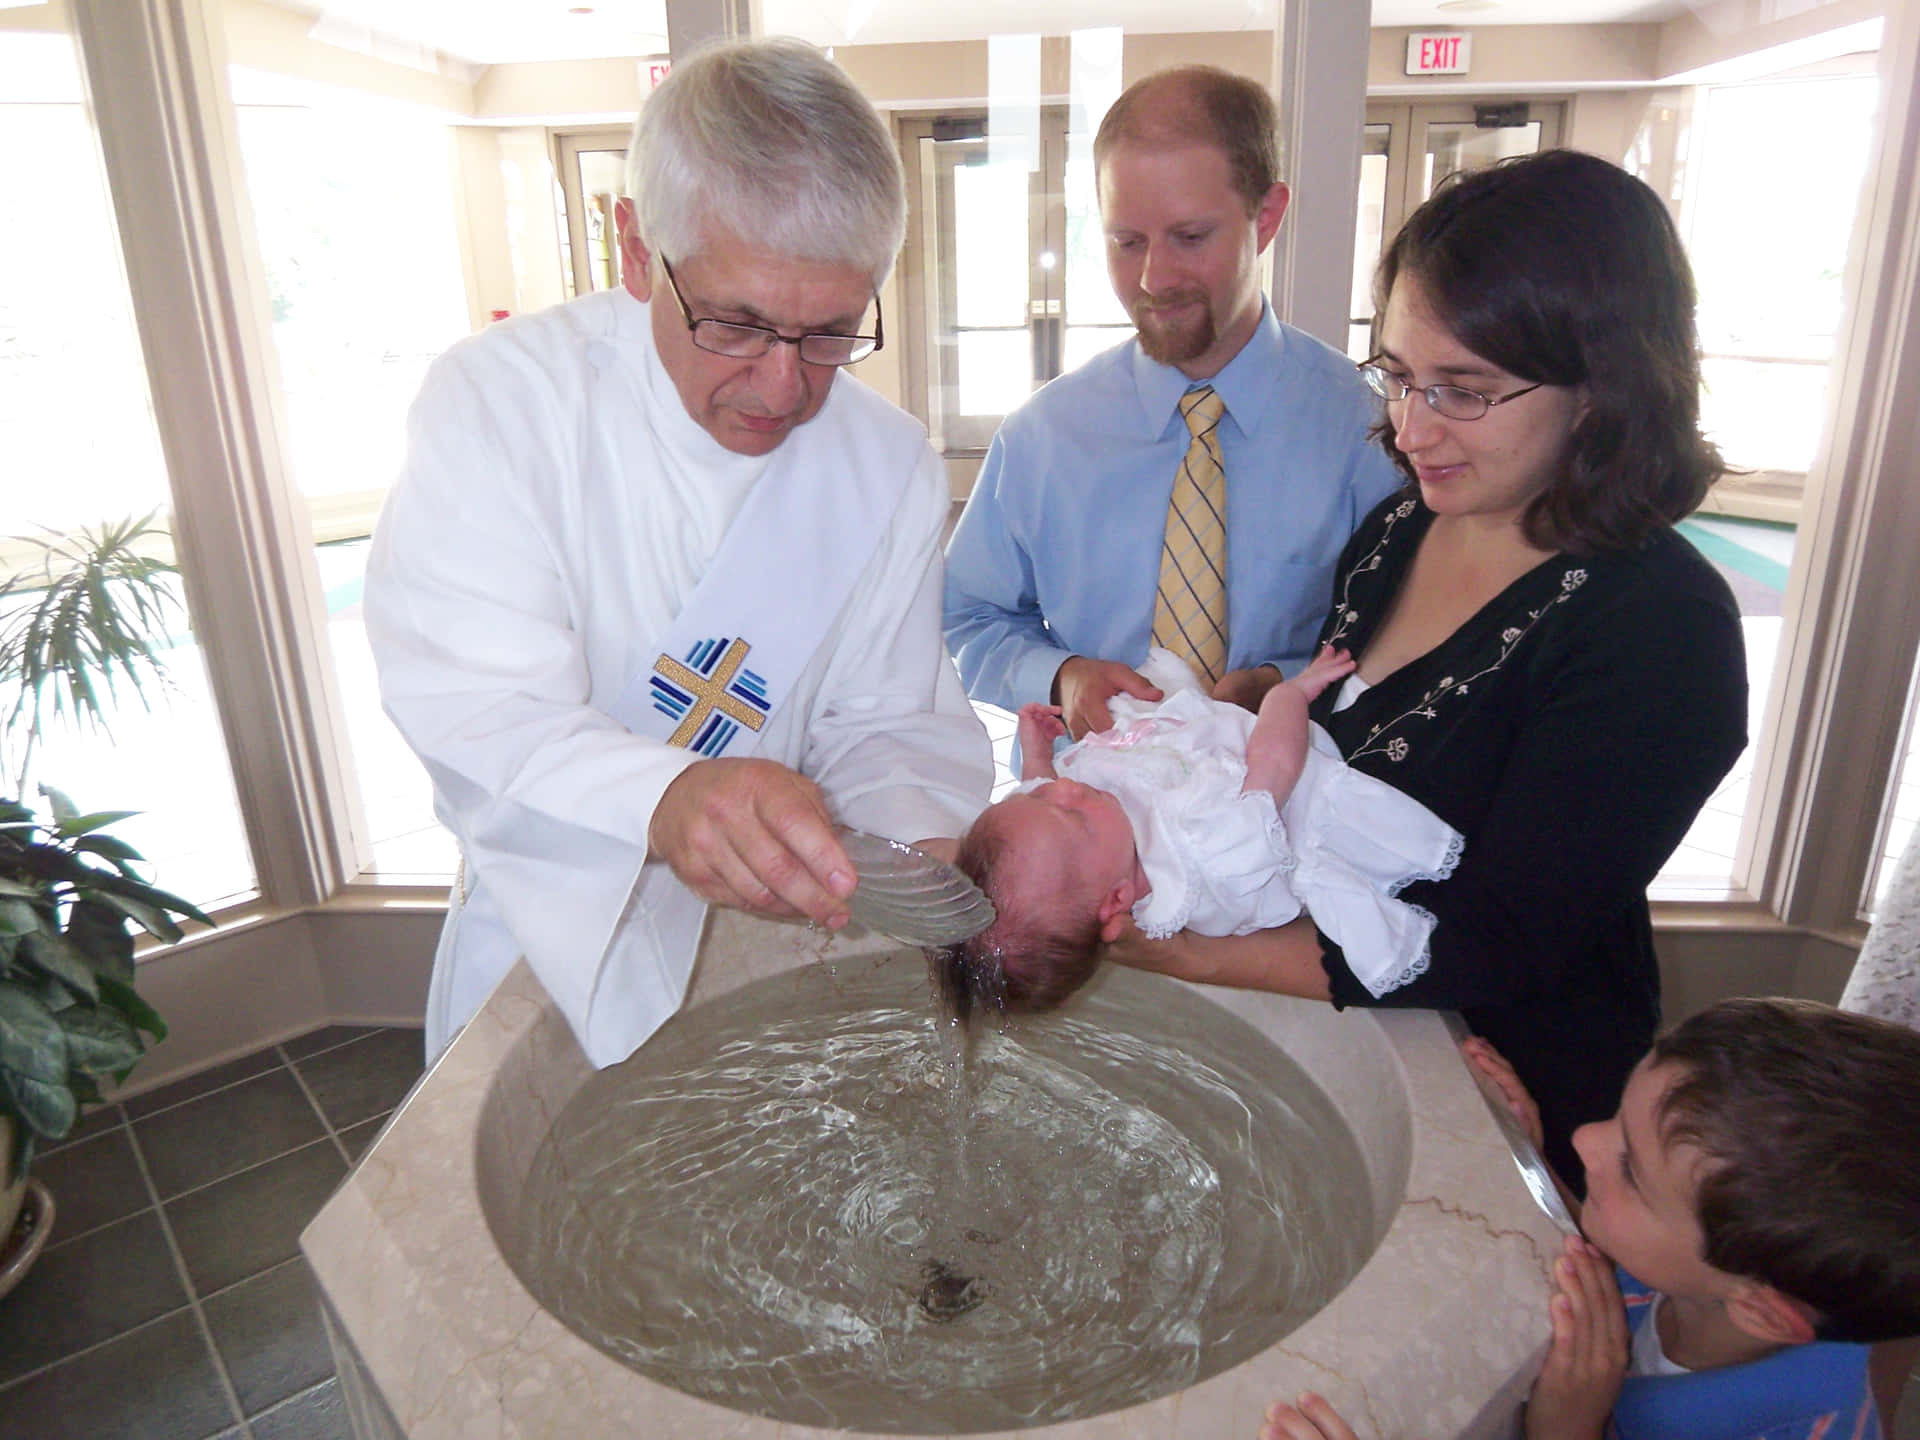 Infant Baptism Signifying New Life in Christ